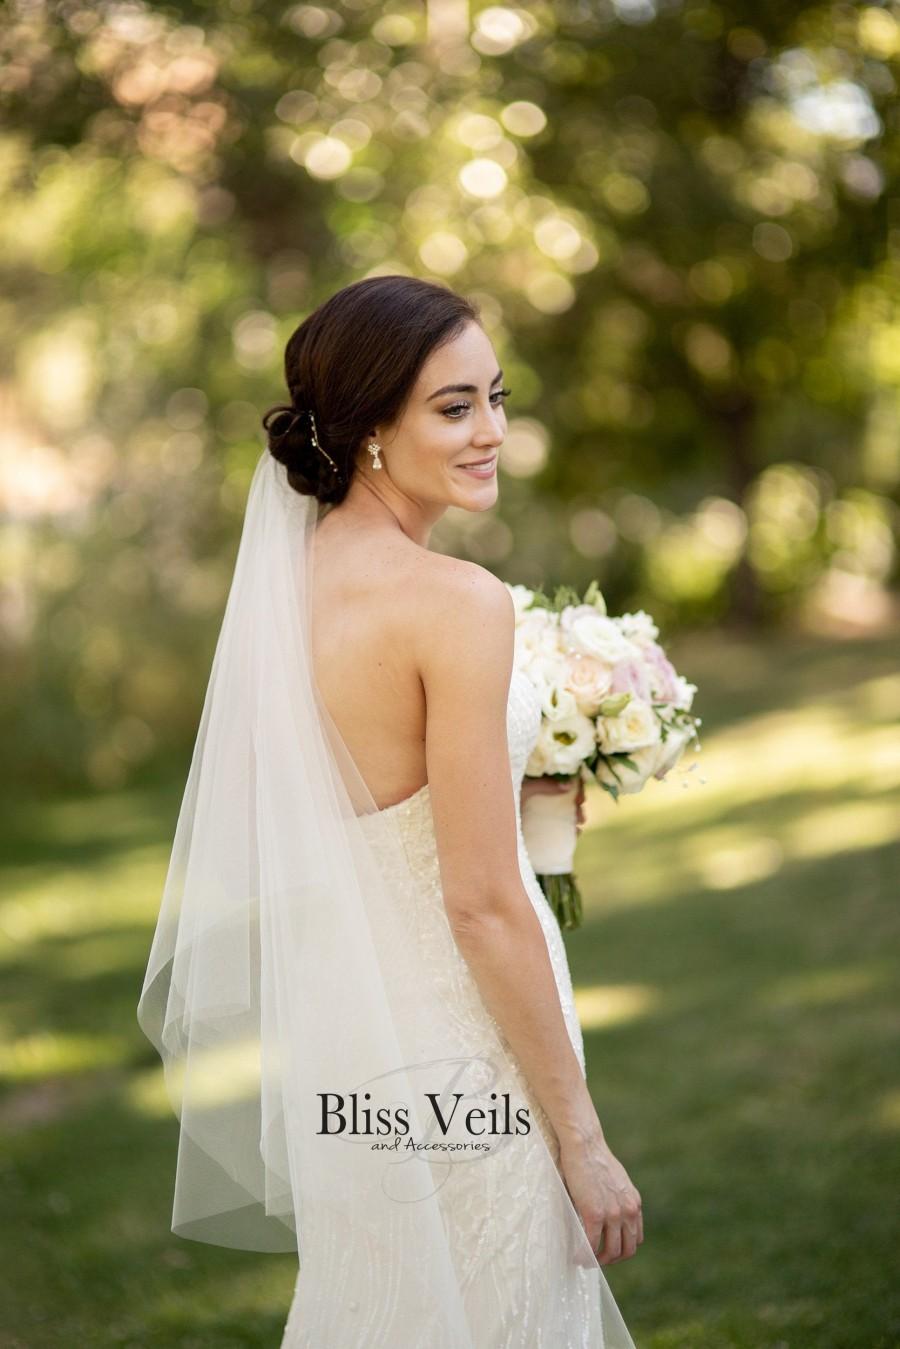 Hochzeit - Gorgeous 2 Tier Plain Edge Drop Veil - Veil with Blusher - Available in 9 Lengths & 10 Colors, Fast Shipping!